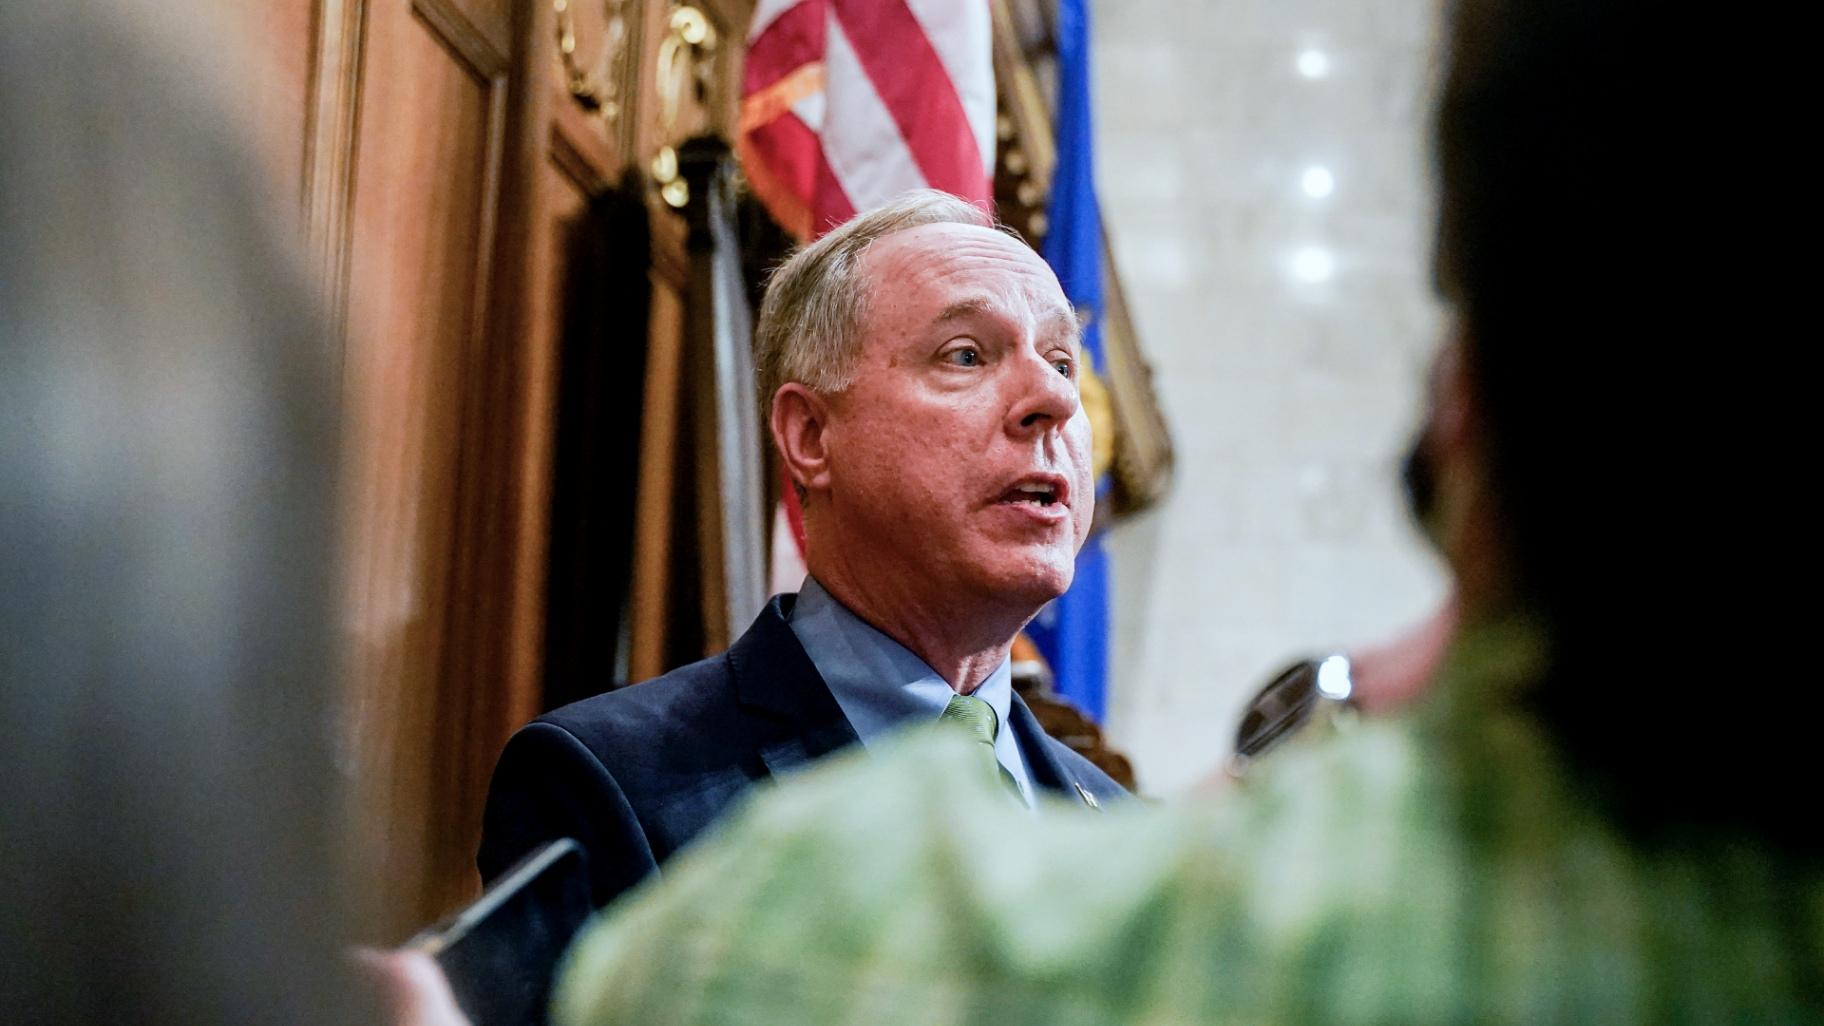 Wisconsin Assembly Speaker Robin Vos talks to the media after Gov. Tony Evers addressed a joint session of the Legislature in the Assembly chambers during the Governor’s State of the State speech at the state Capitol, Feb. 15, 2022, in Madison, Wis. (AP Photo / Andy Manis, File)